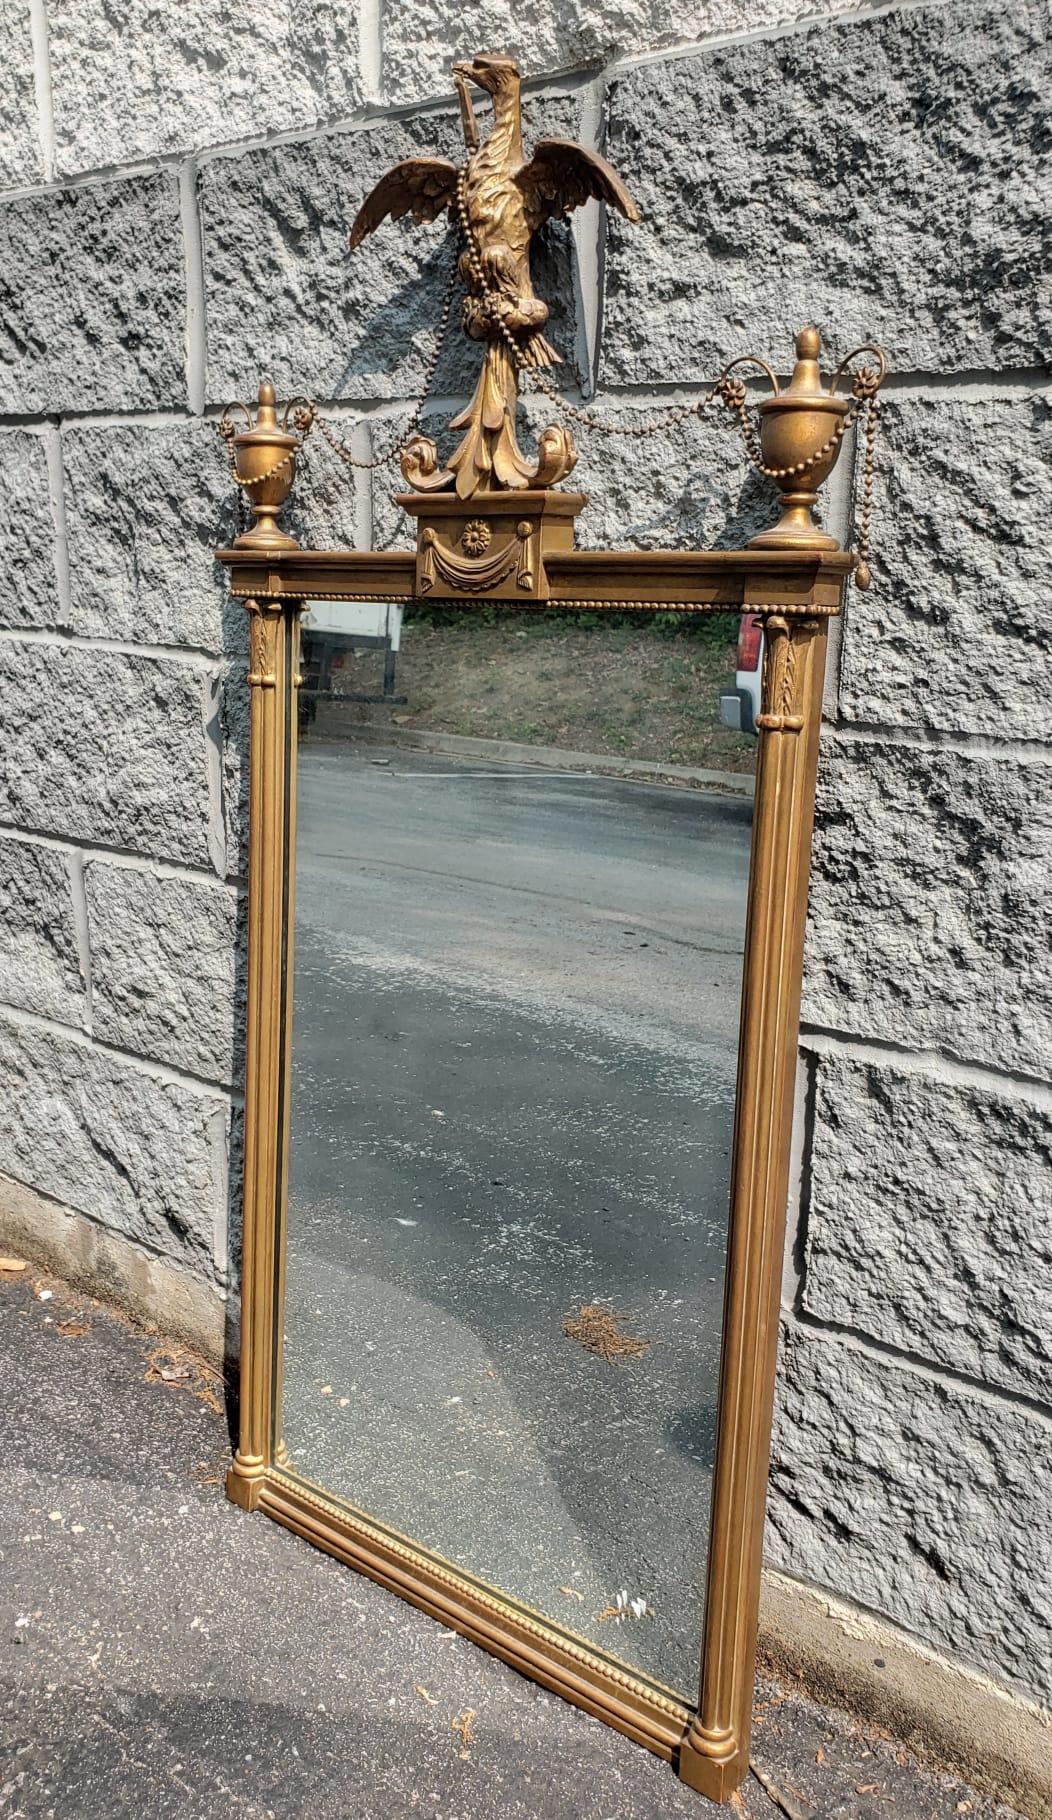 An Early 20th Century Federal Style Gilt Decorated Eagle Pediment Frame Mirror. Measures 20.5